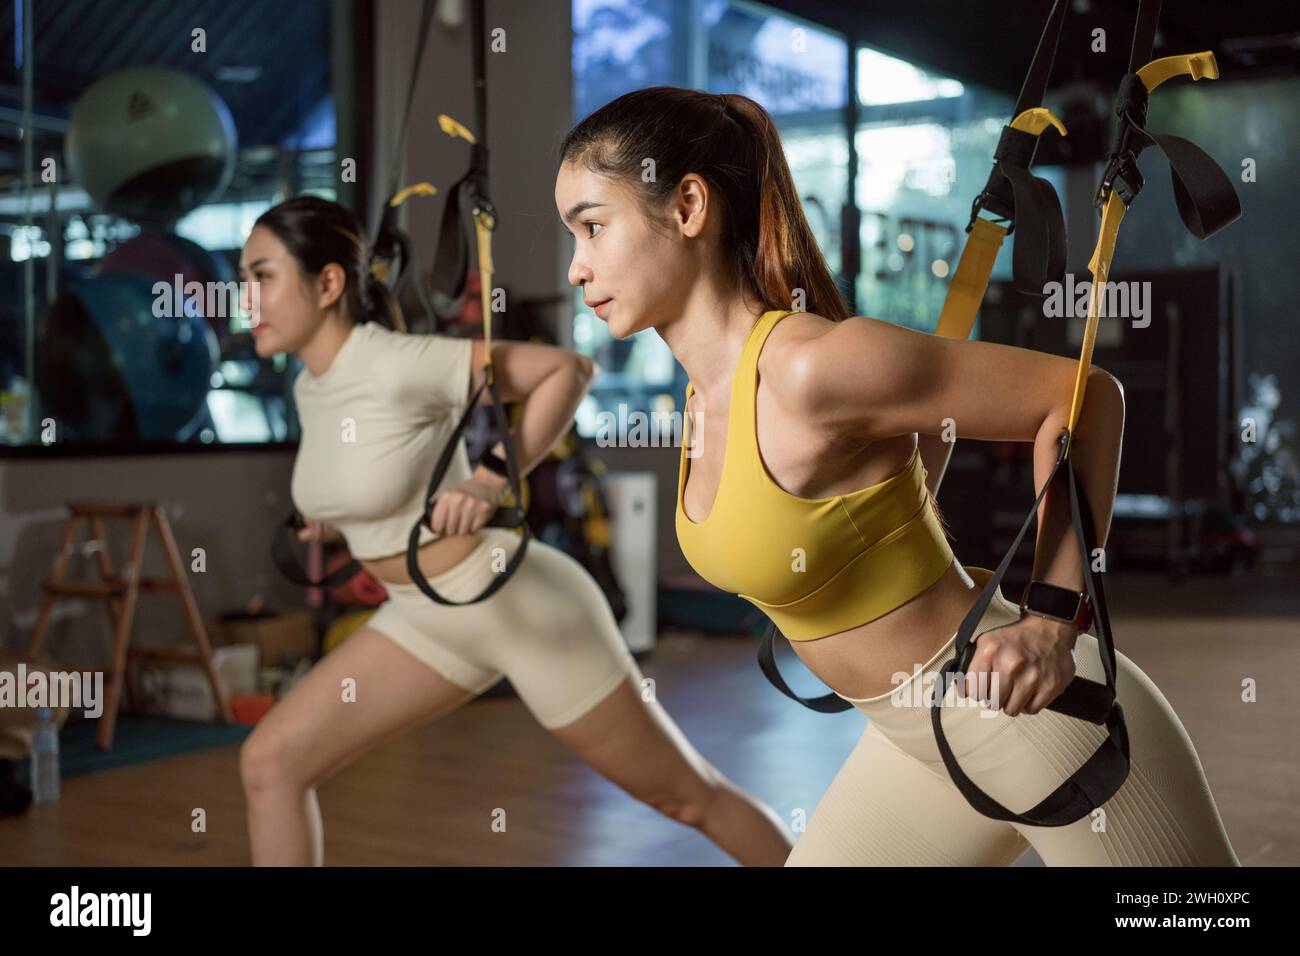 Asian woman doing push ups, arm training with trx fitness straps in the gym. Stock Photo